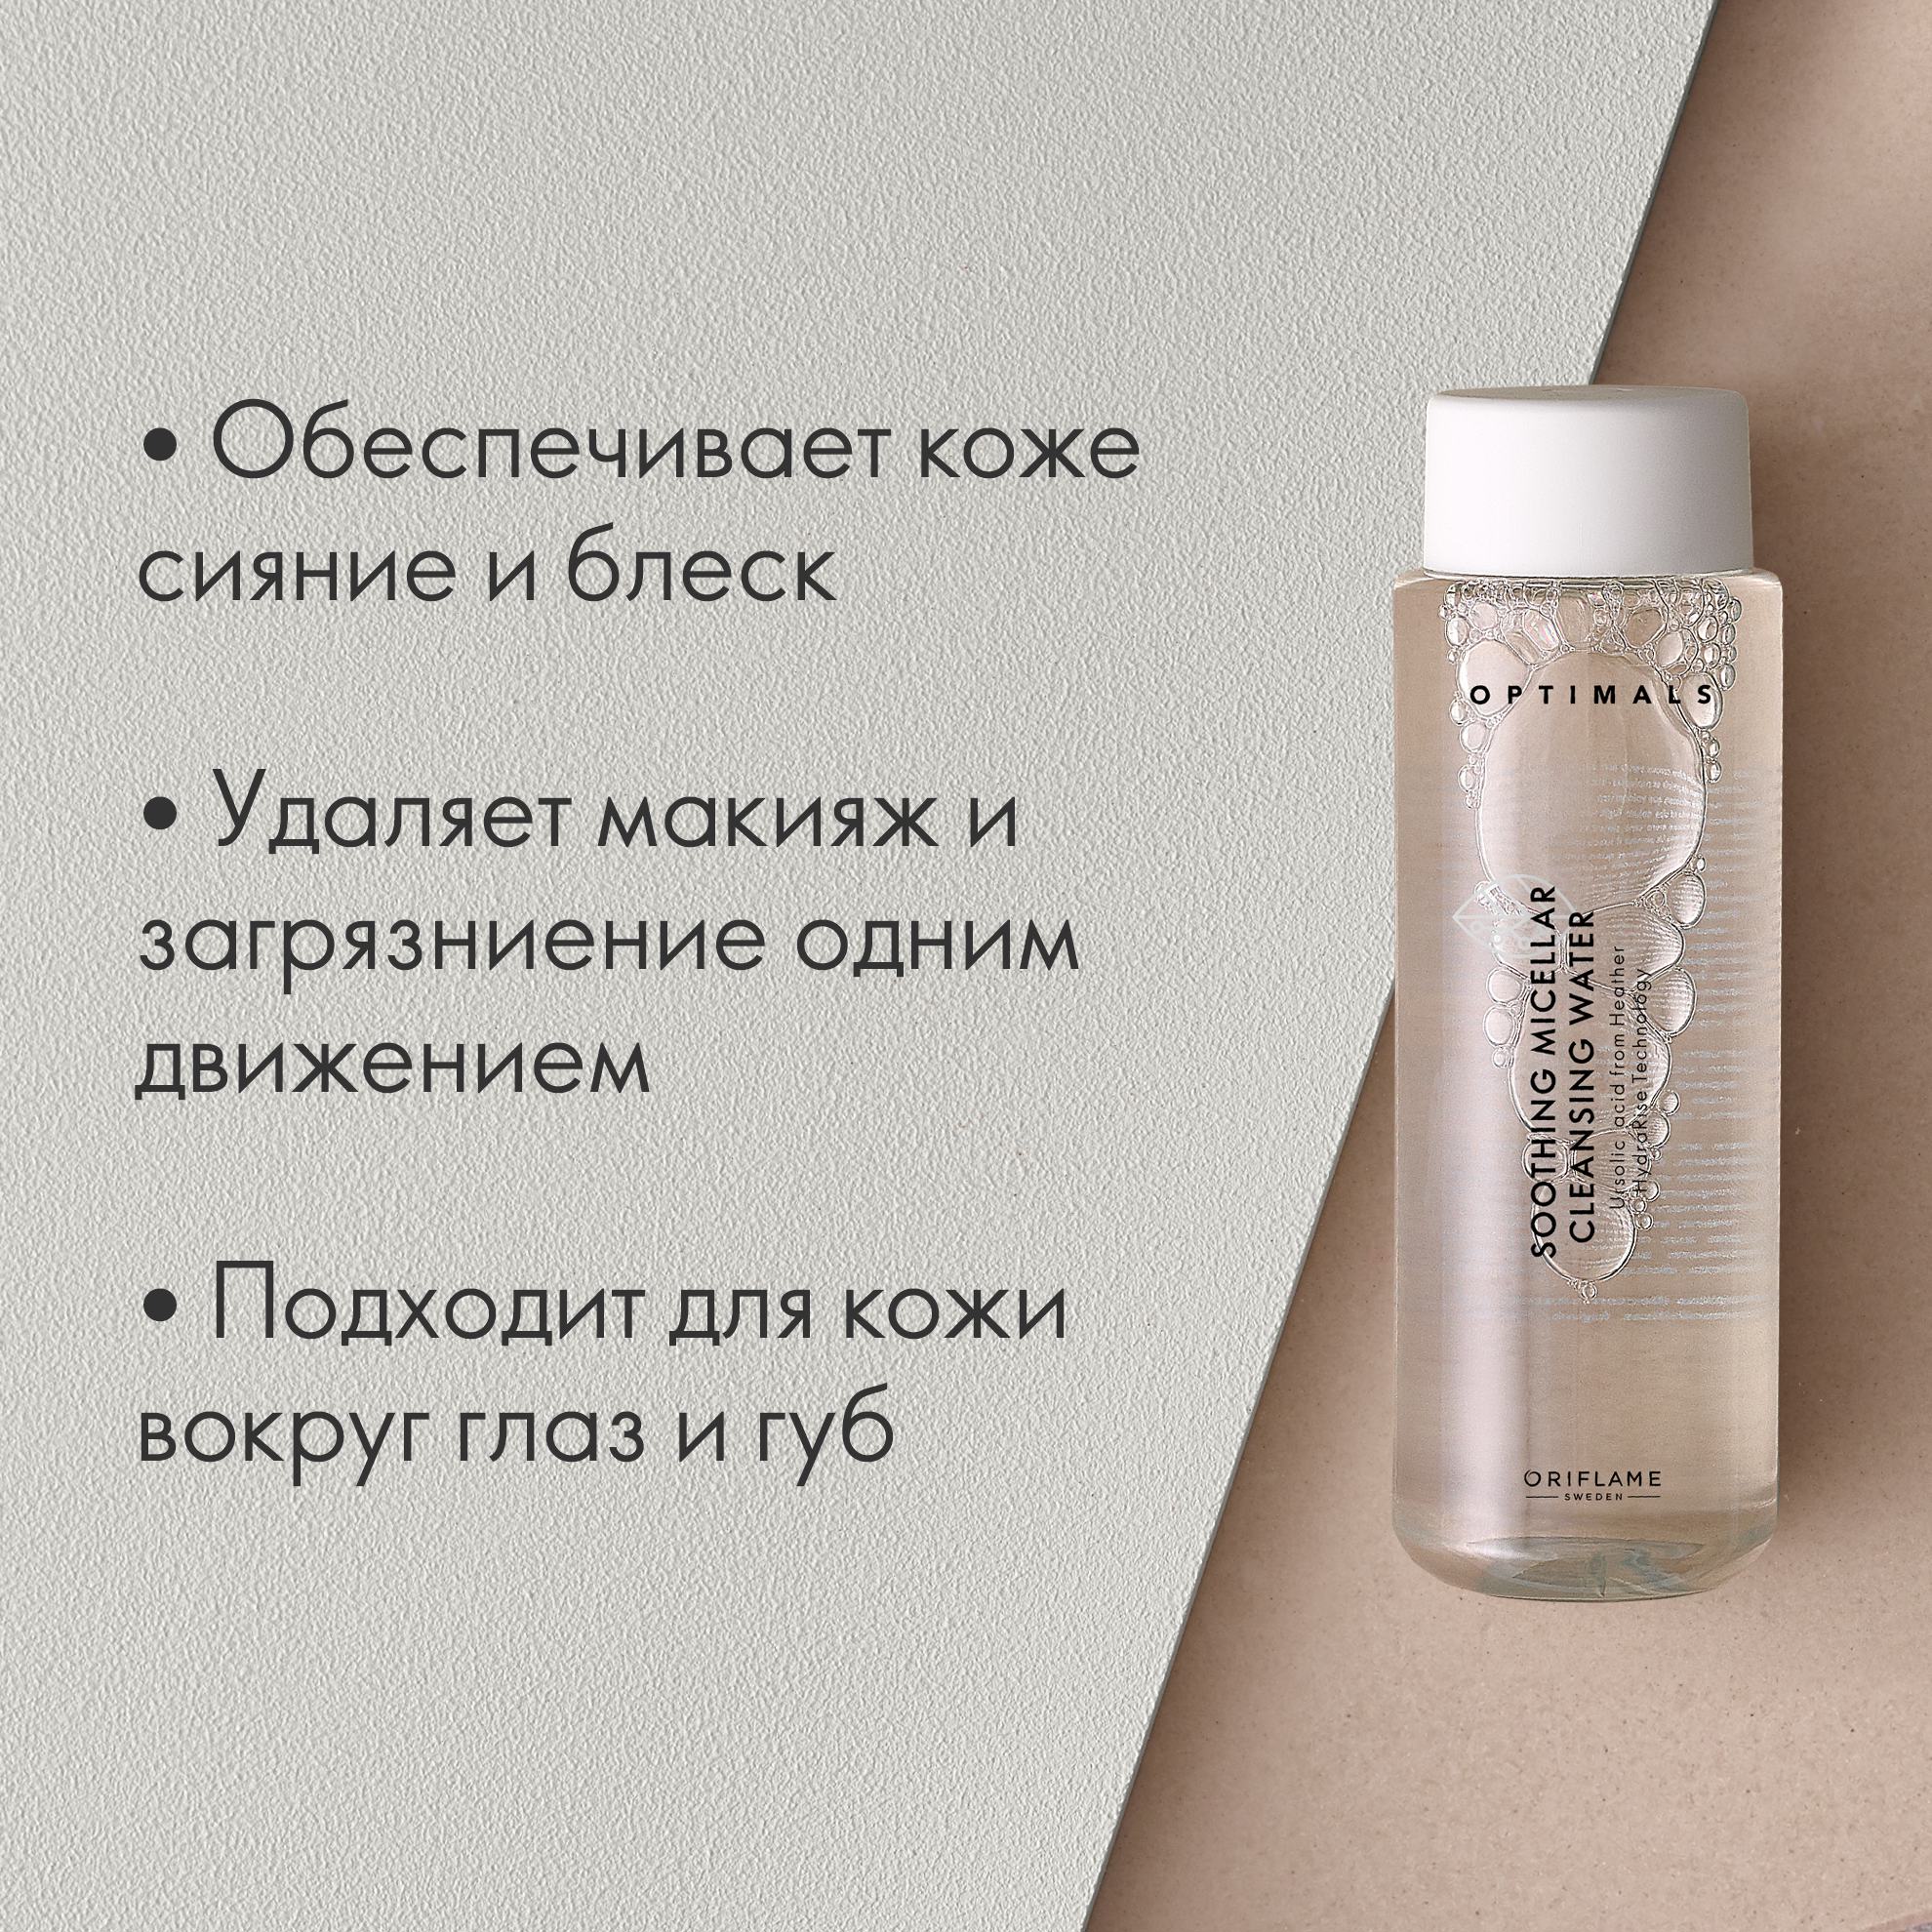 https://media-cdn.oriflame.com/productImage?externalMediaId=product-management-media%2fProducts%2f42610%2fBY%2f42610_4.png&id=15087749&version=1